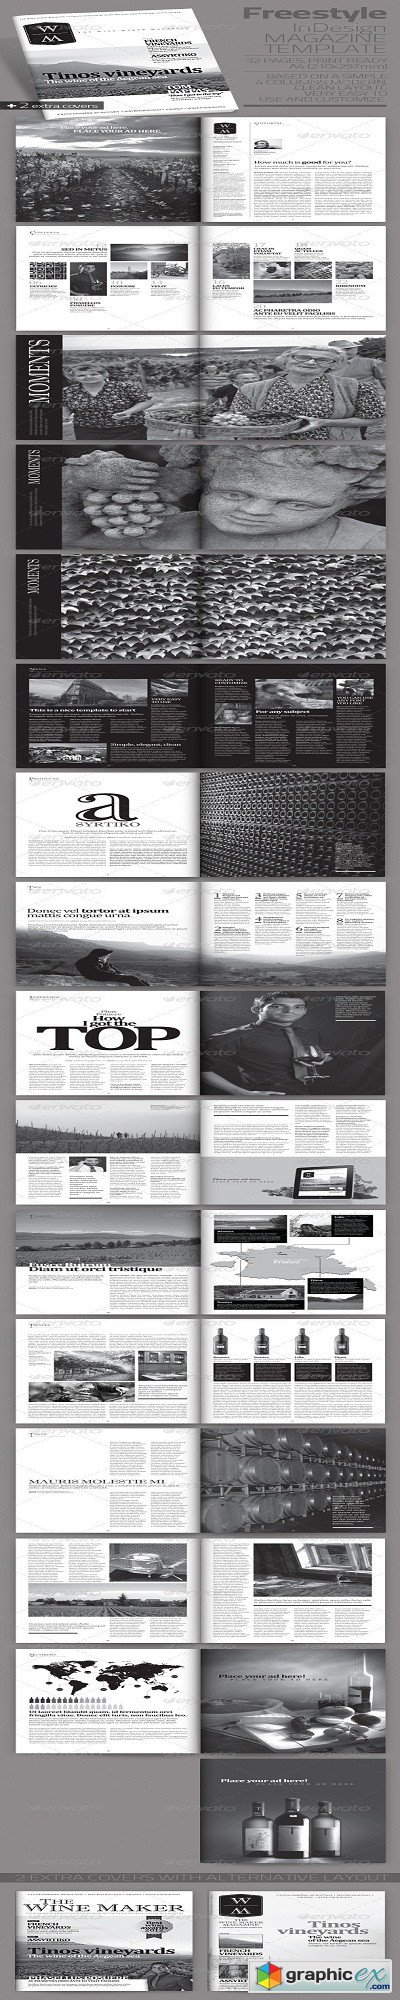 Freestyle | InDesign Magazine Template